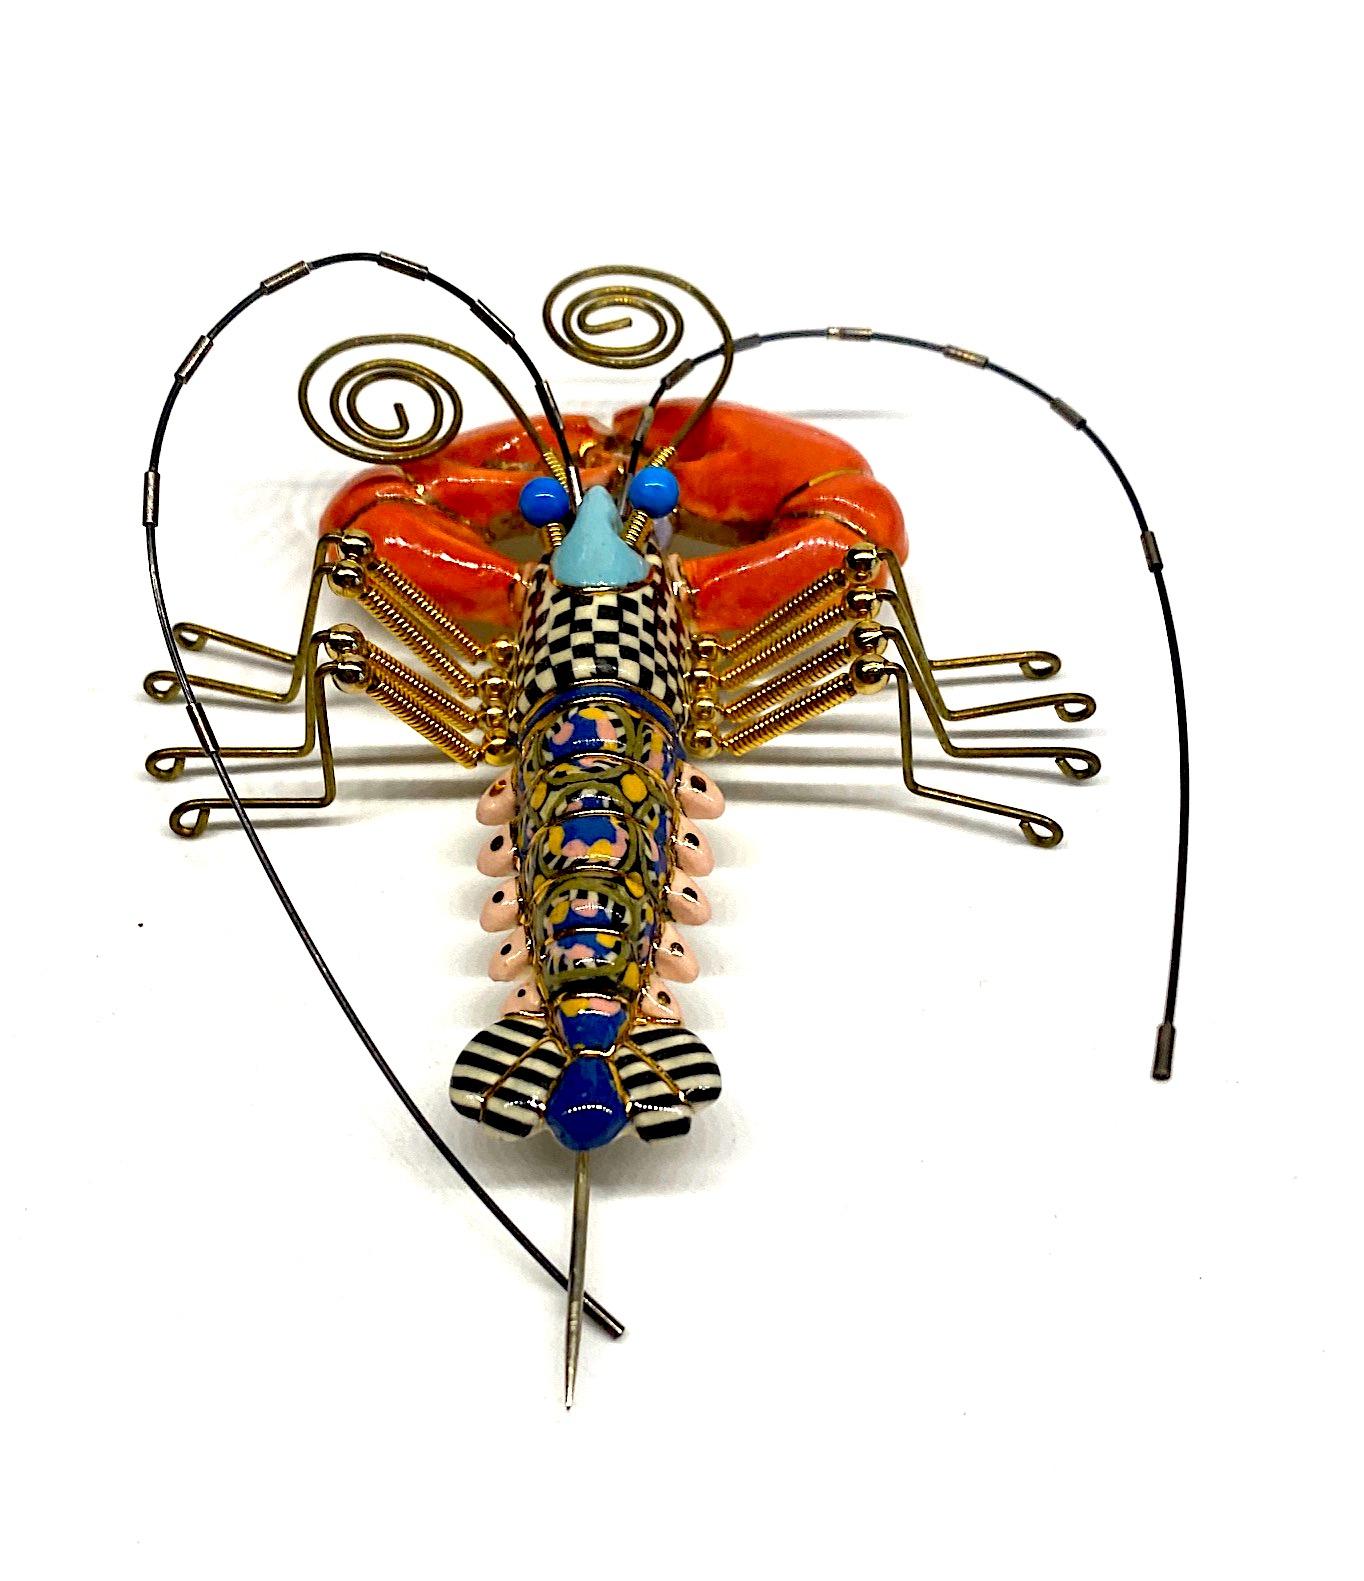 Always with a sense of whimsy, Jewelry 10 pieces designed by Cynthia Chuang and her husband Erh-Ping Tsai are highly collected and displayed. This is a one of kind hand made lobster brooch from the company Jewelry 10. The lobster porcelain body is